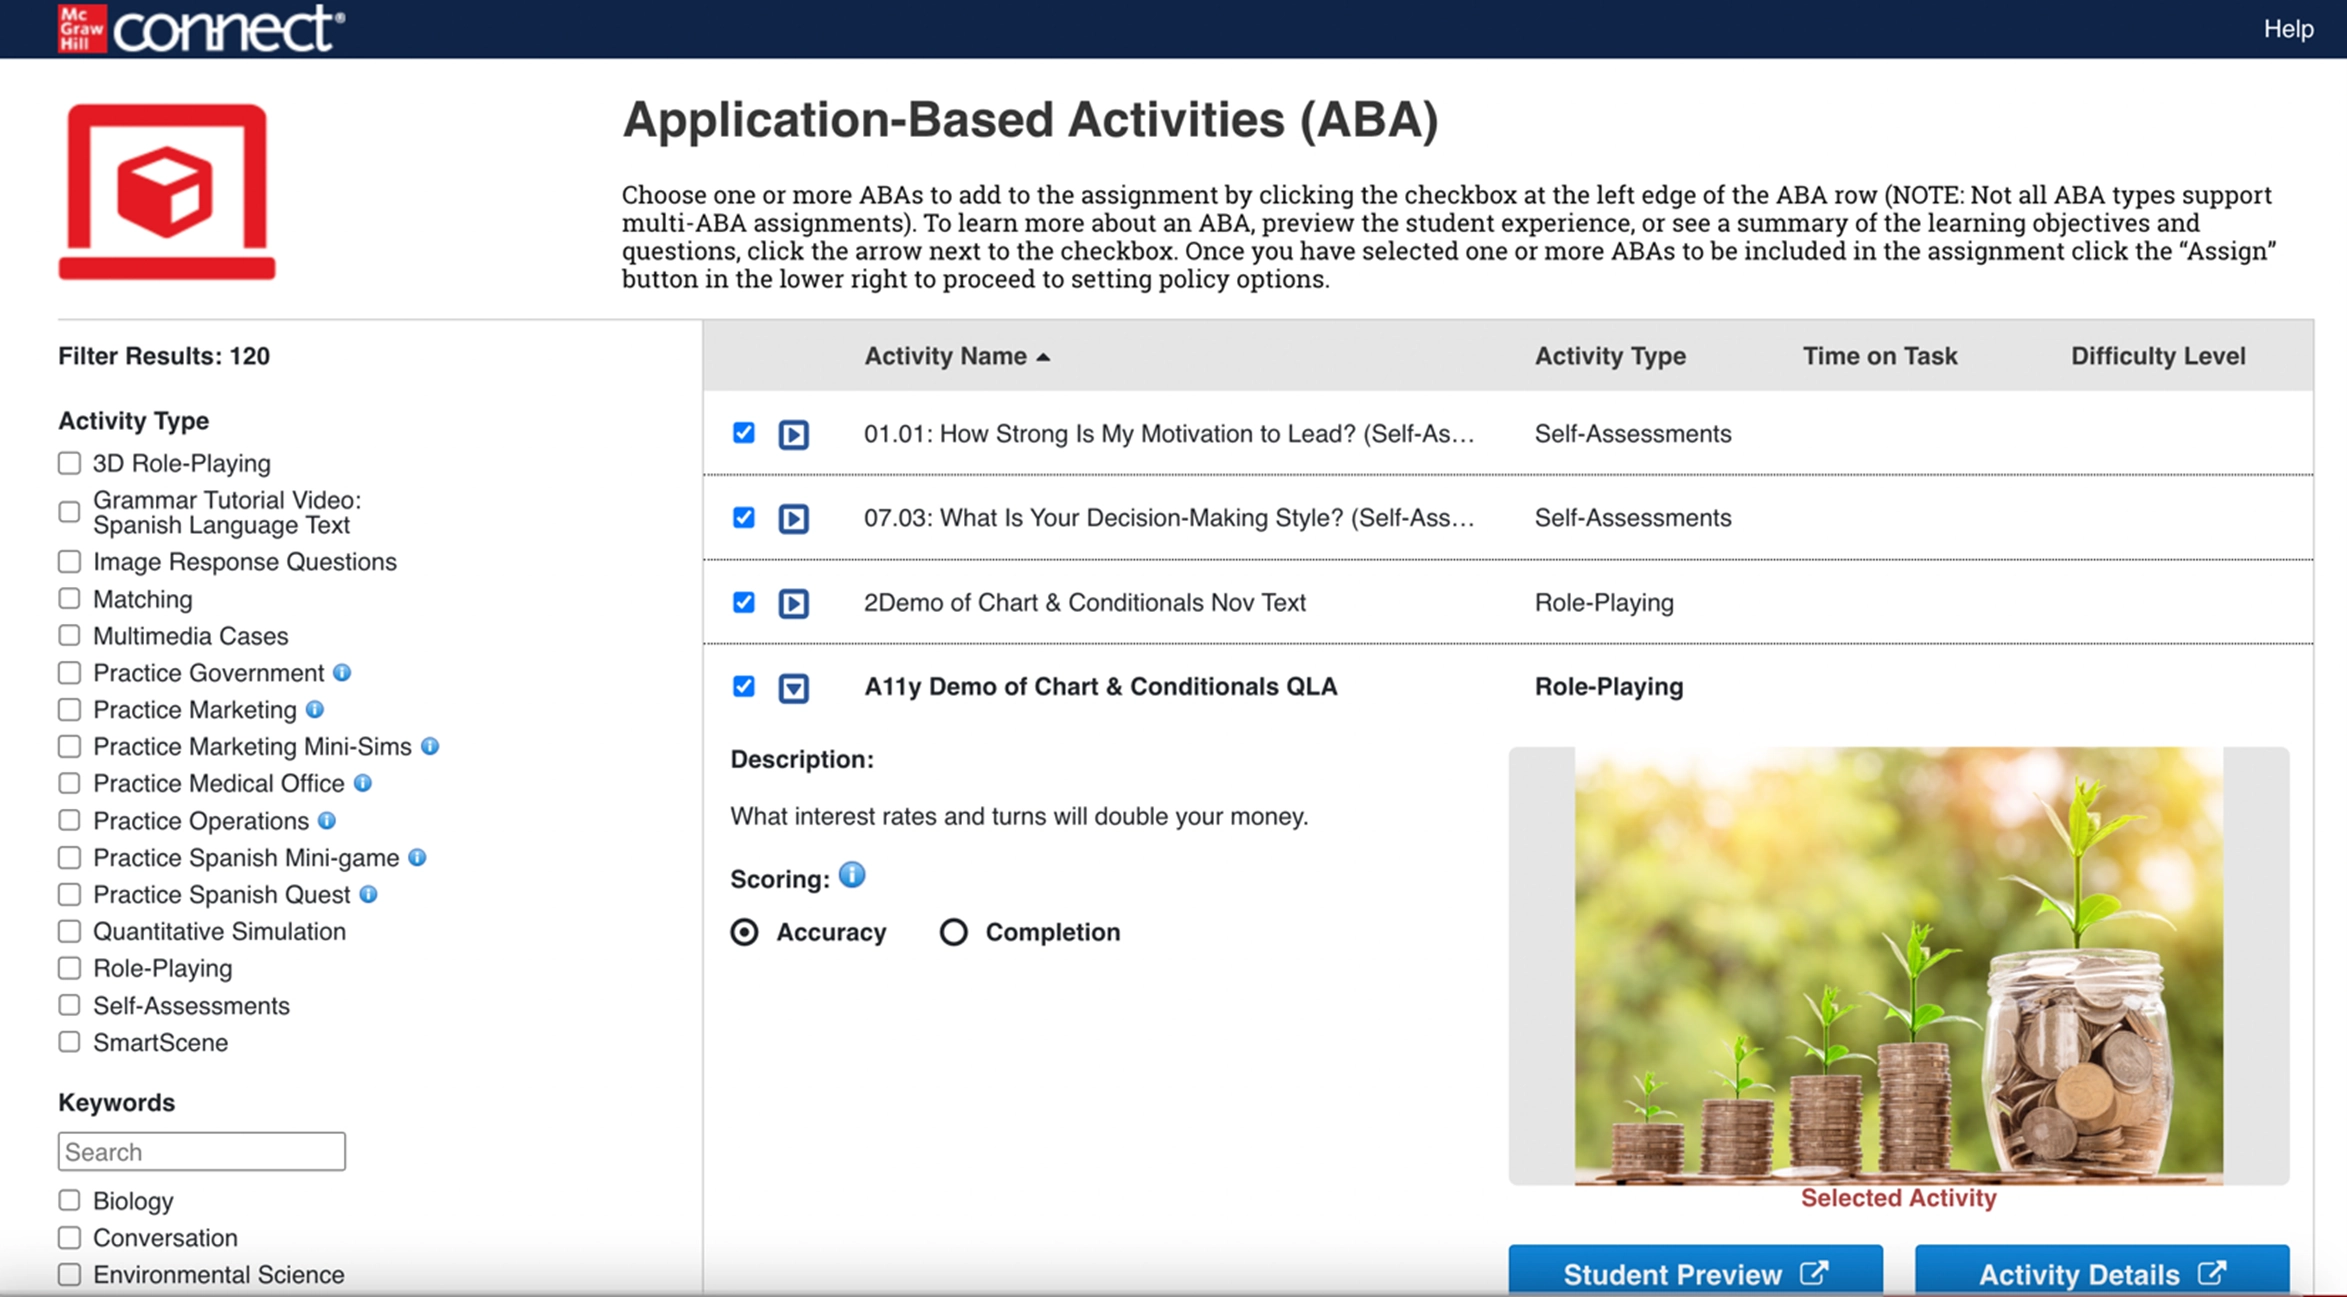 Connect screenshot showing application-based activities